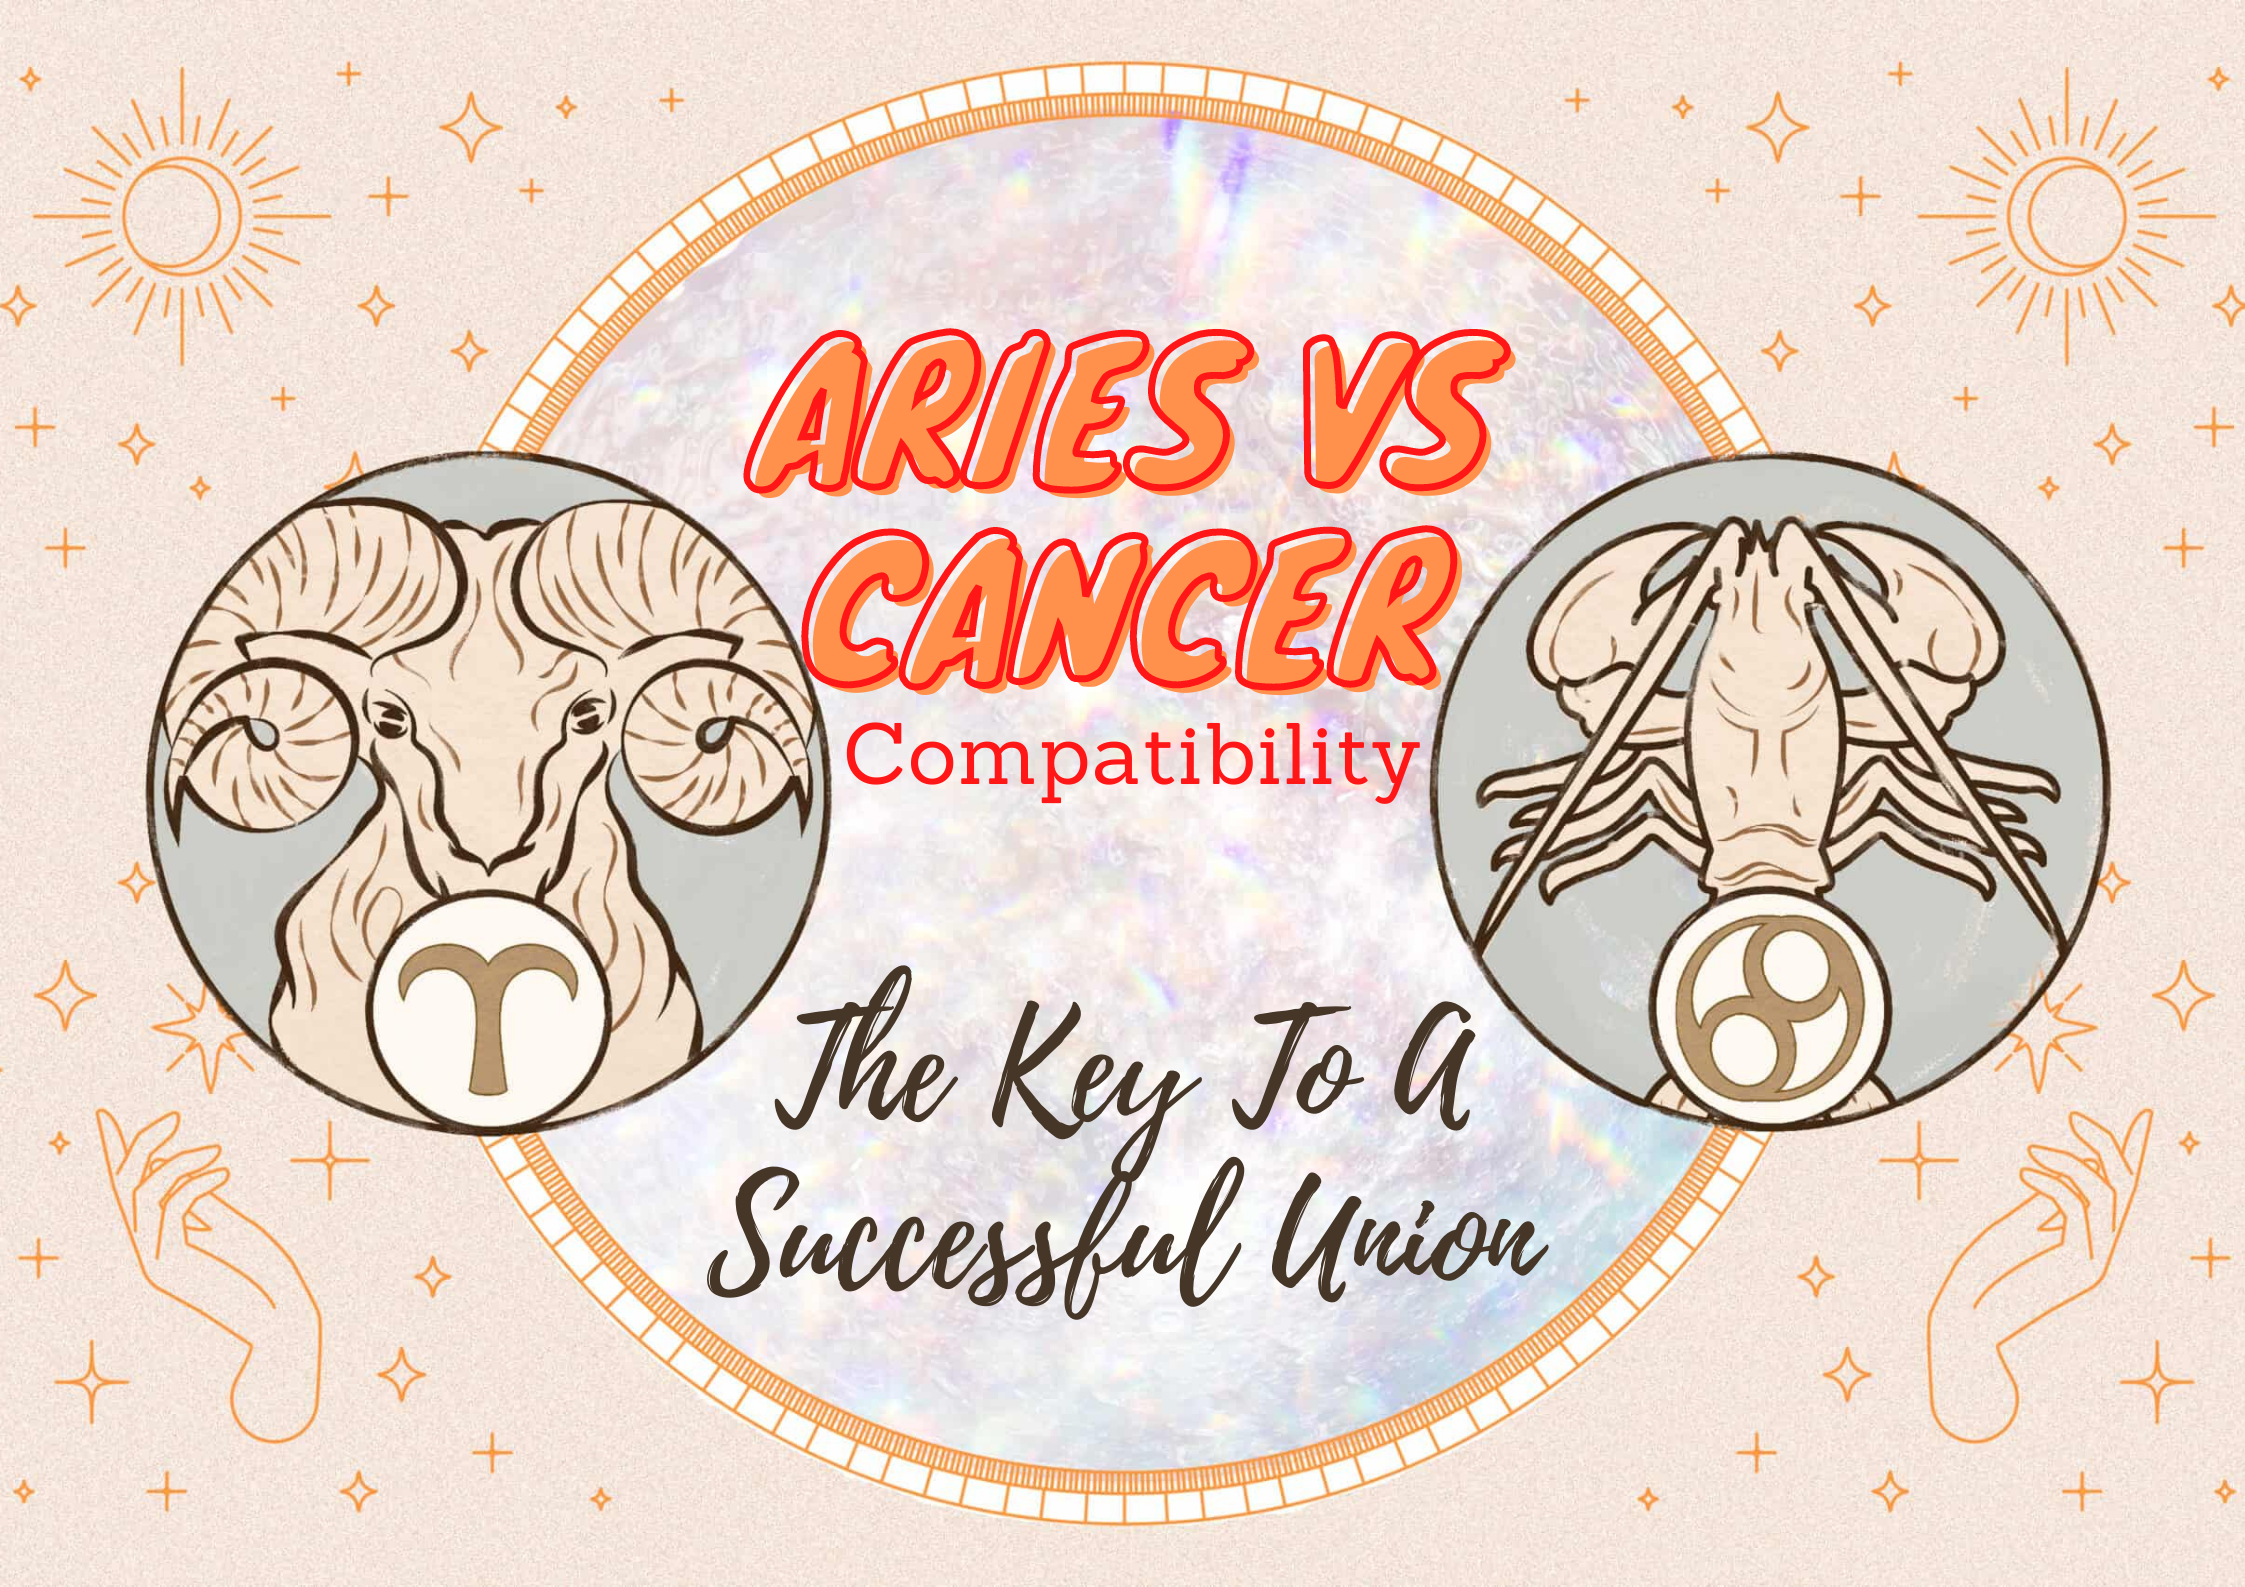 Aries Vs Cancer Compatibility - The Key To A Successful Union